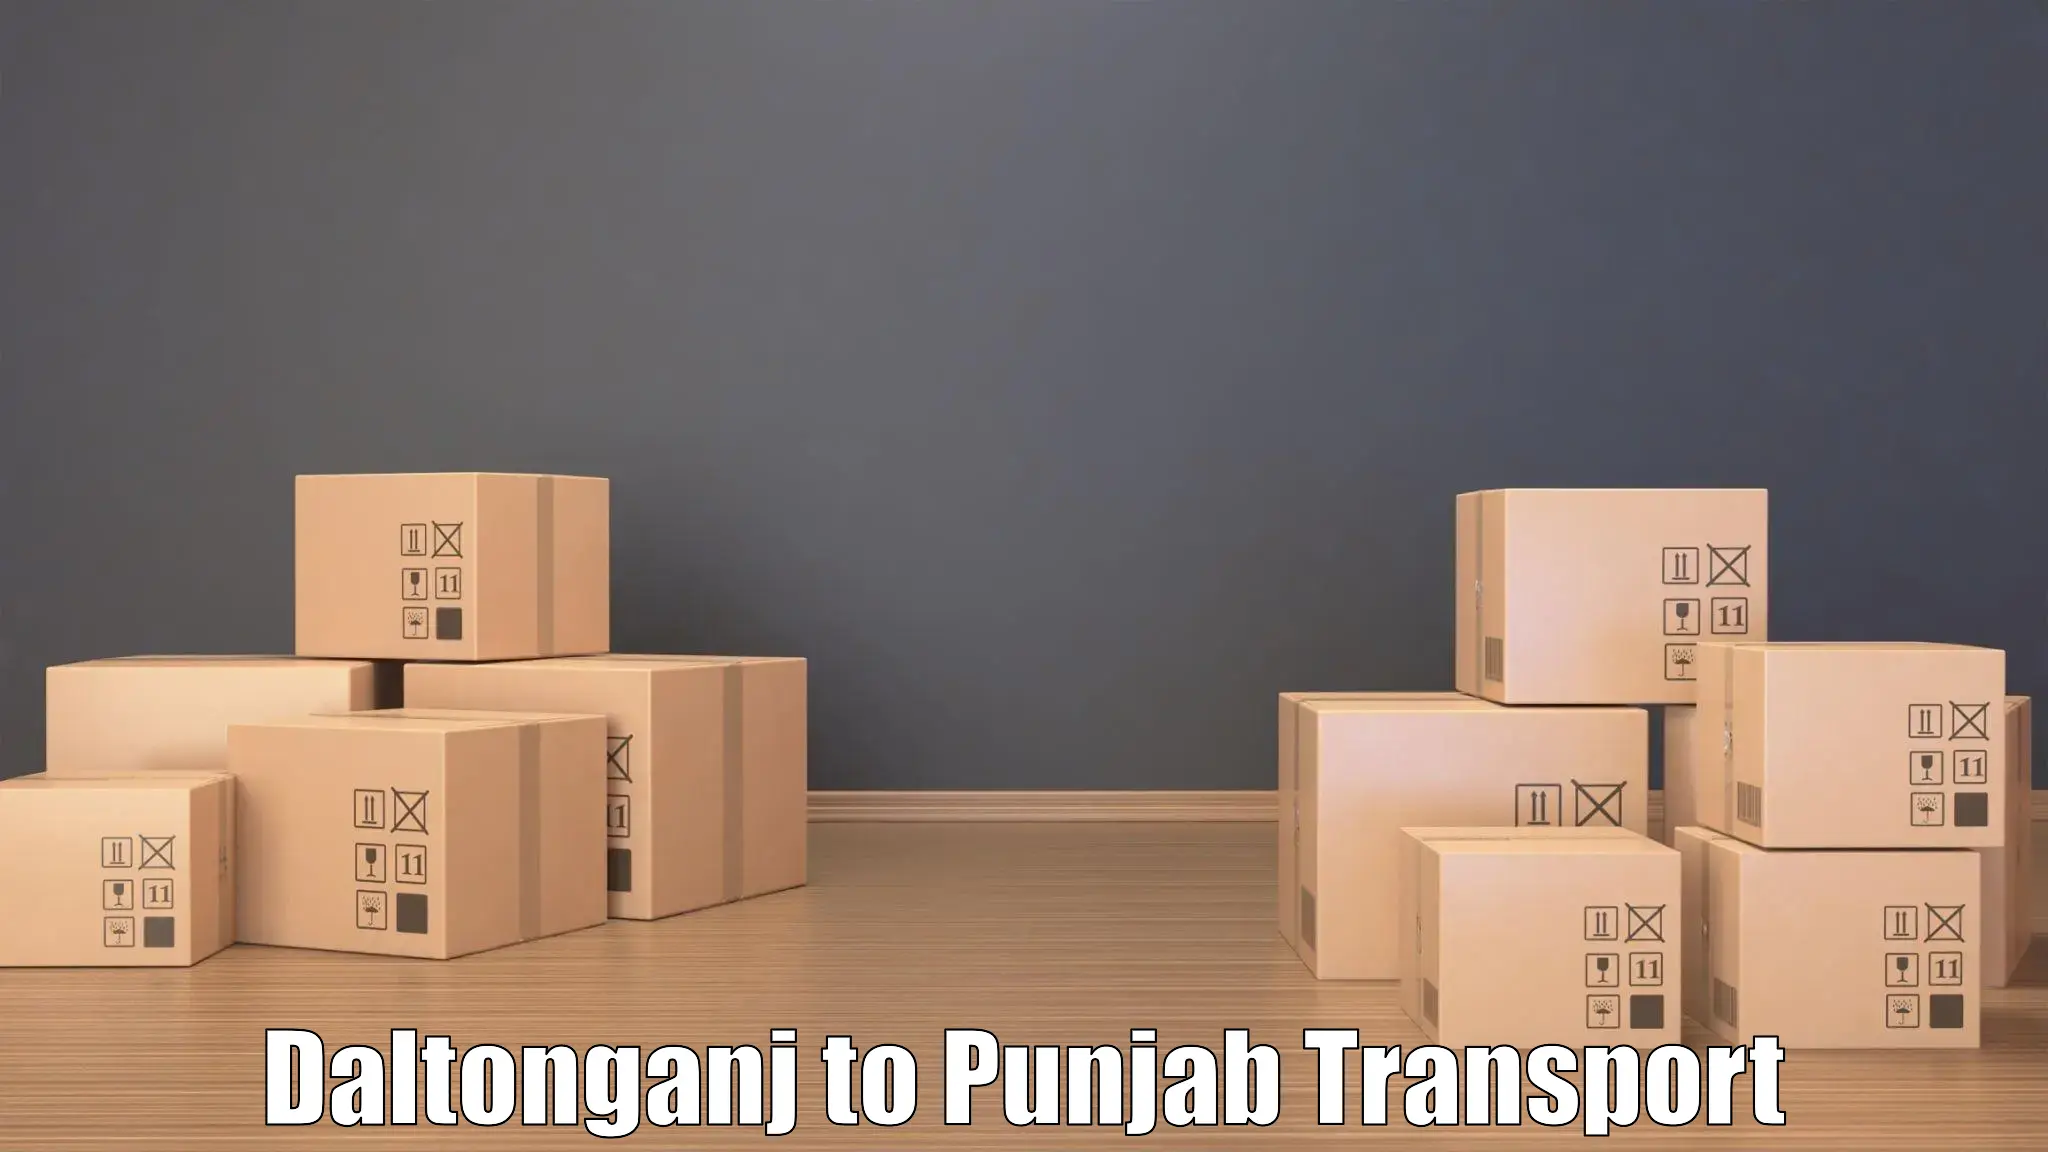 Transport bike from one state to another Daltonganj to Punjab